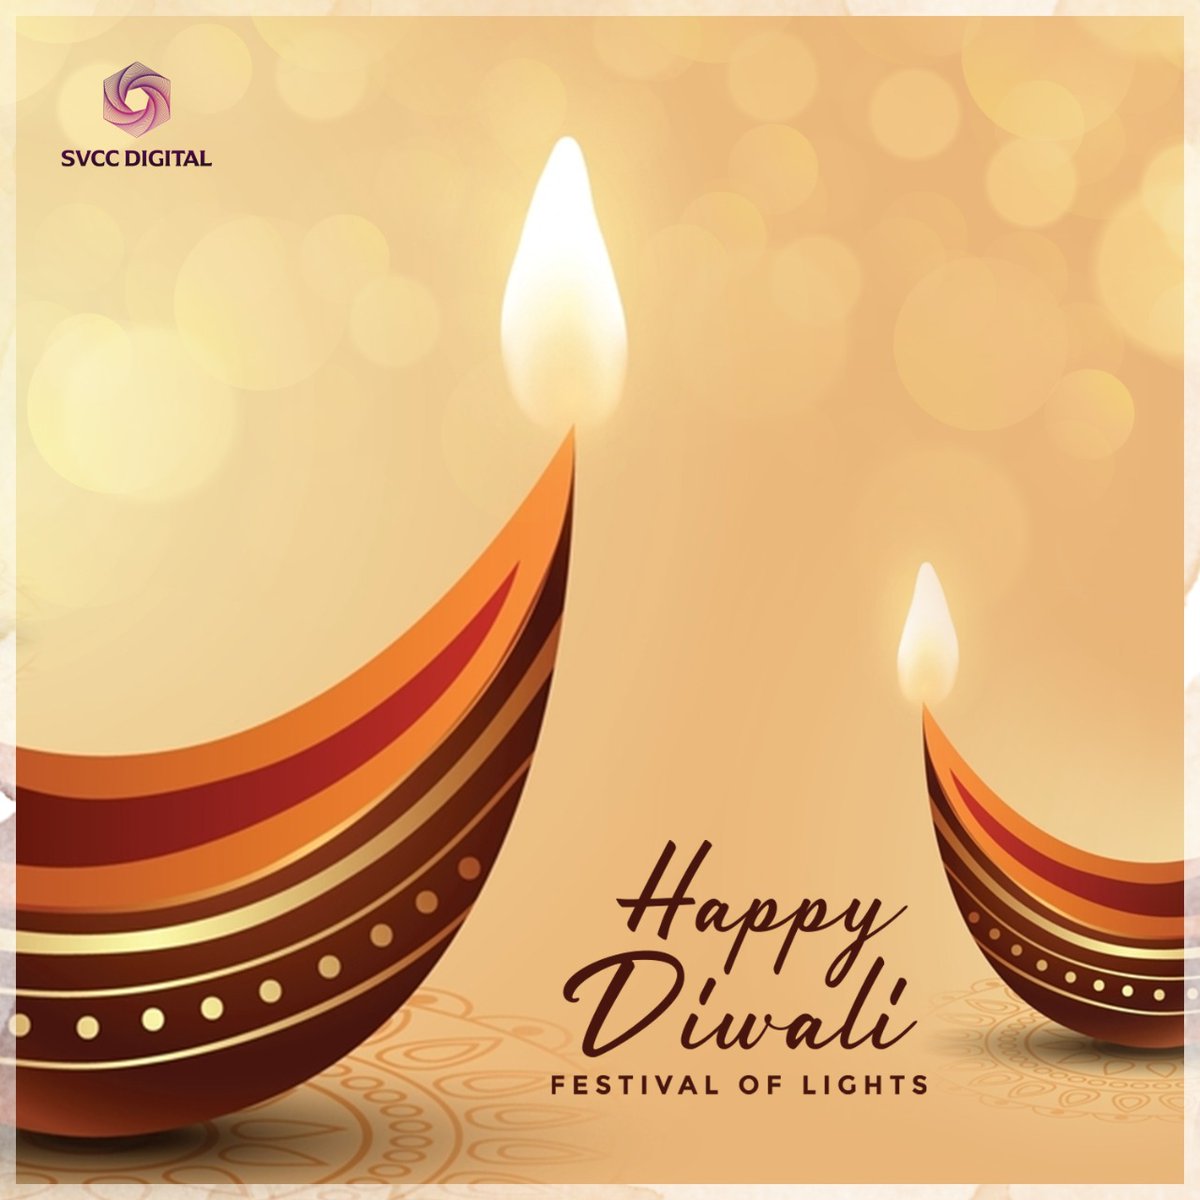 May this Diwali bless you with loads of love, life & happiness. #HappyDiwali